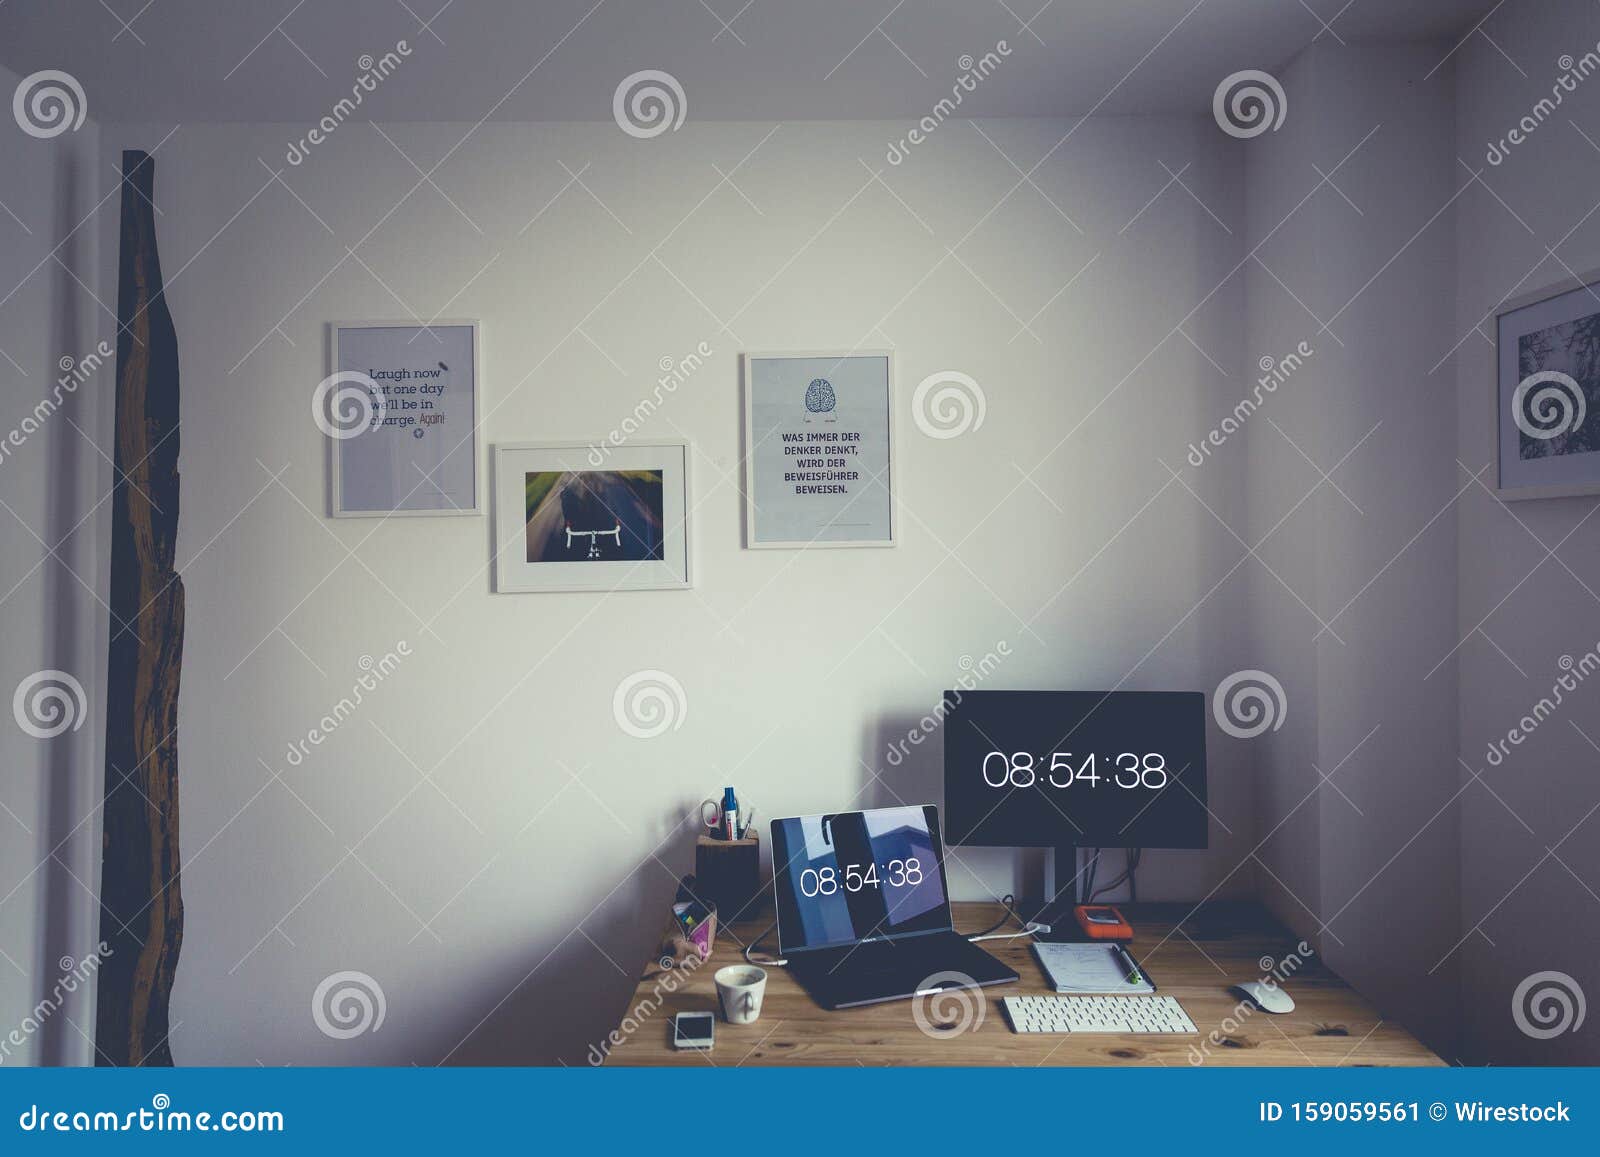 High Angle Shot Of A Desk With A Computer A Laptop And Posters